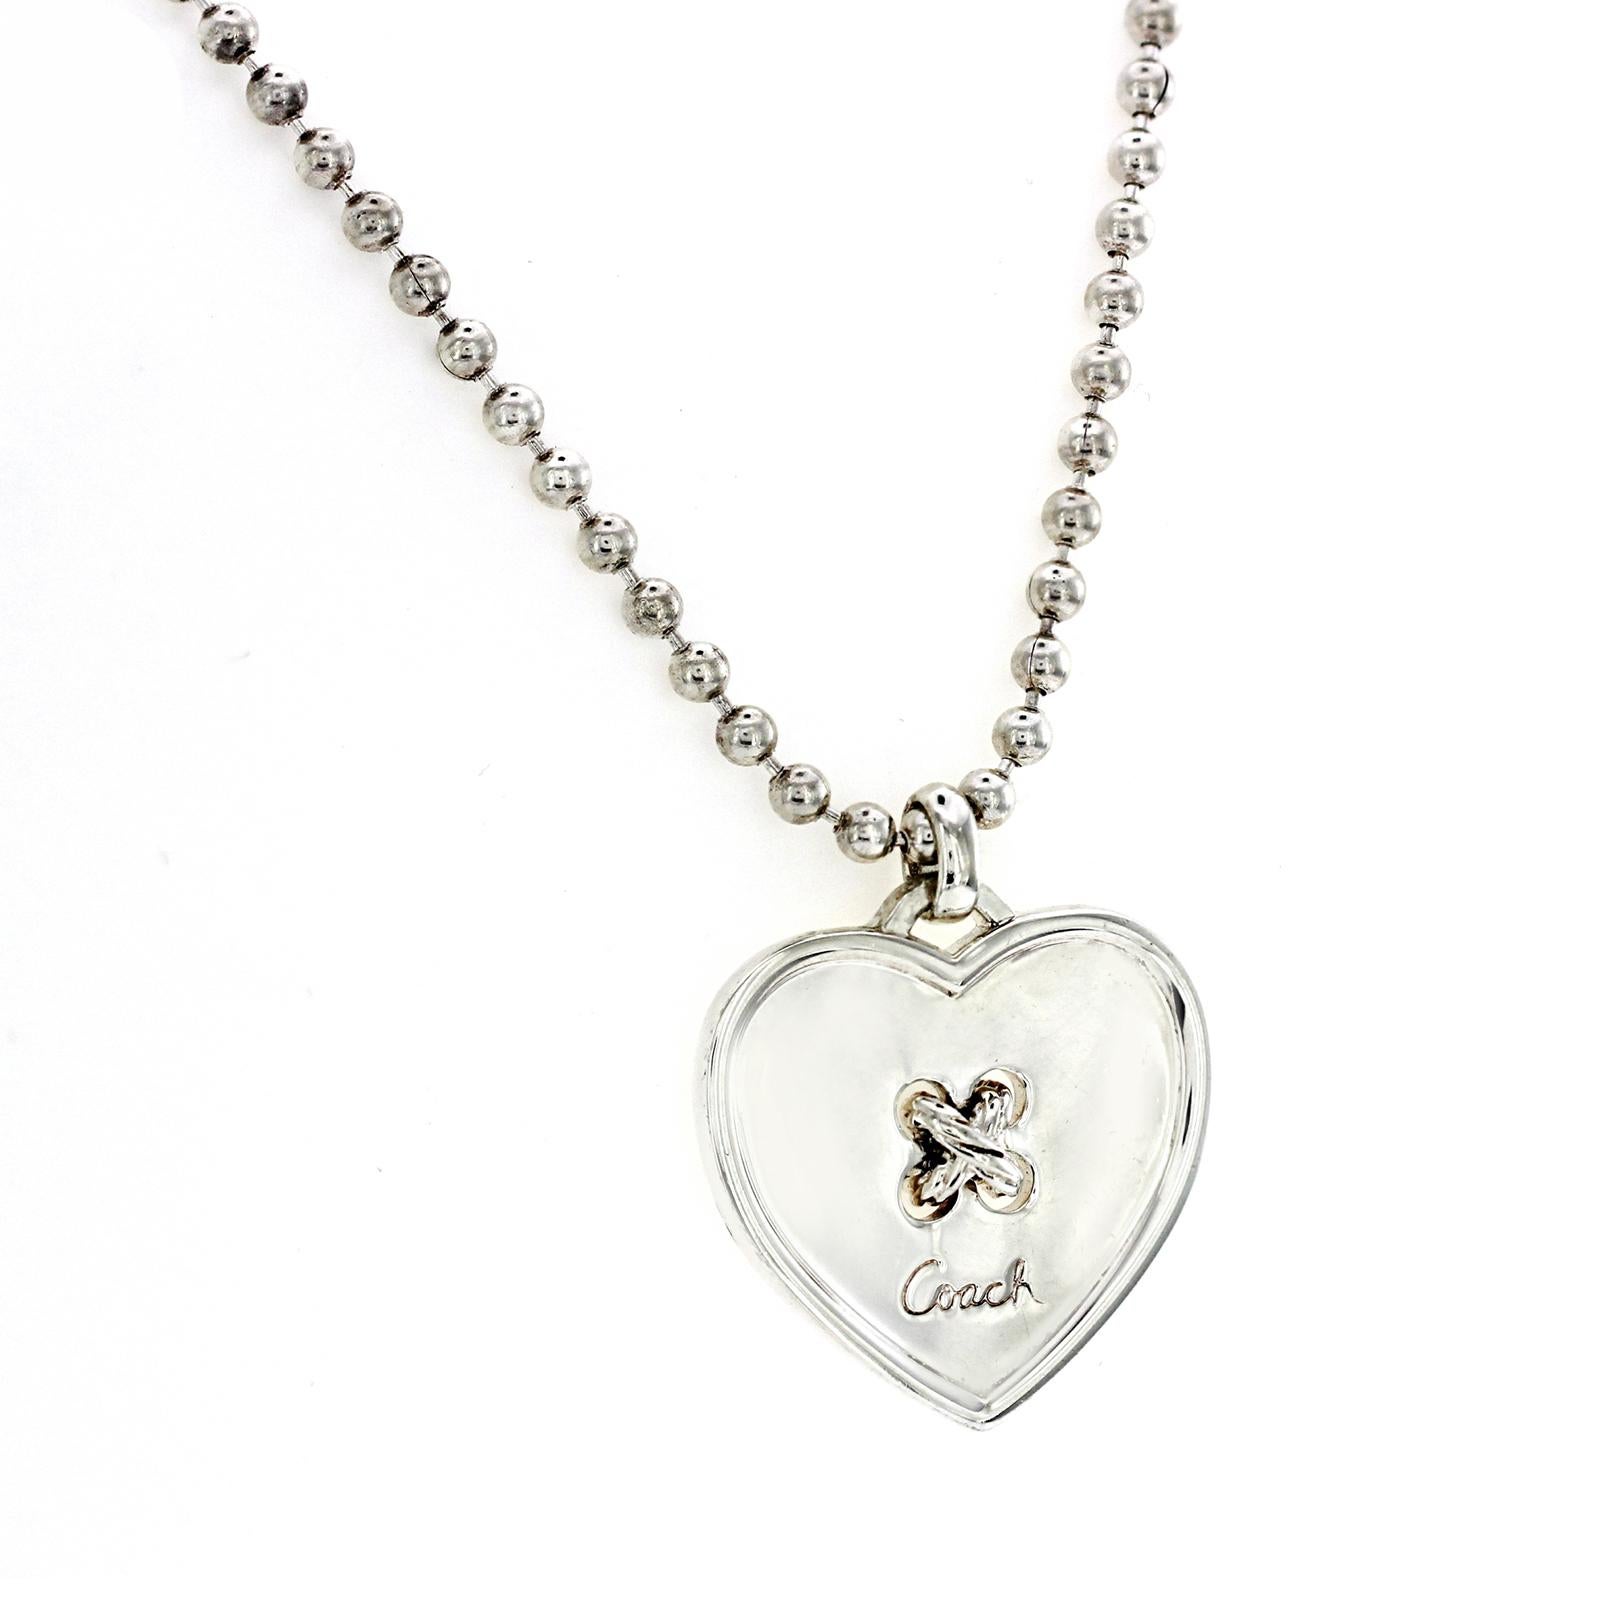 100% Authentic, 100% Customer Satisfaction

Pendant: 25 mm

Chain: 3 mm

Size: 16 Inches

Metal: 925 Sterling Silver

Hallmarks: Coach 925

Total Weight: 22.7 Grams

Stone Type: No Stone

Condition: Pre Owned 

Estimated Price: $650

Stock Number: